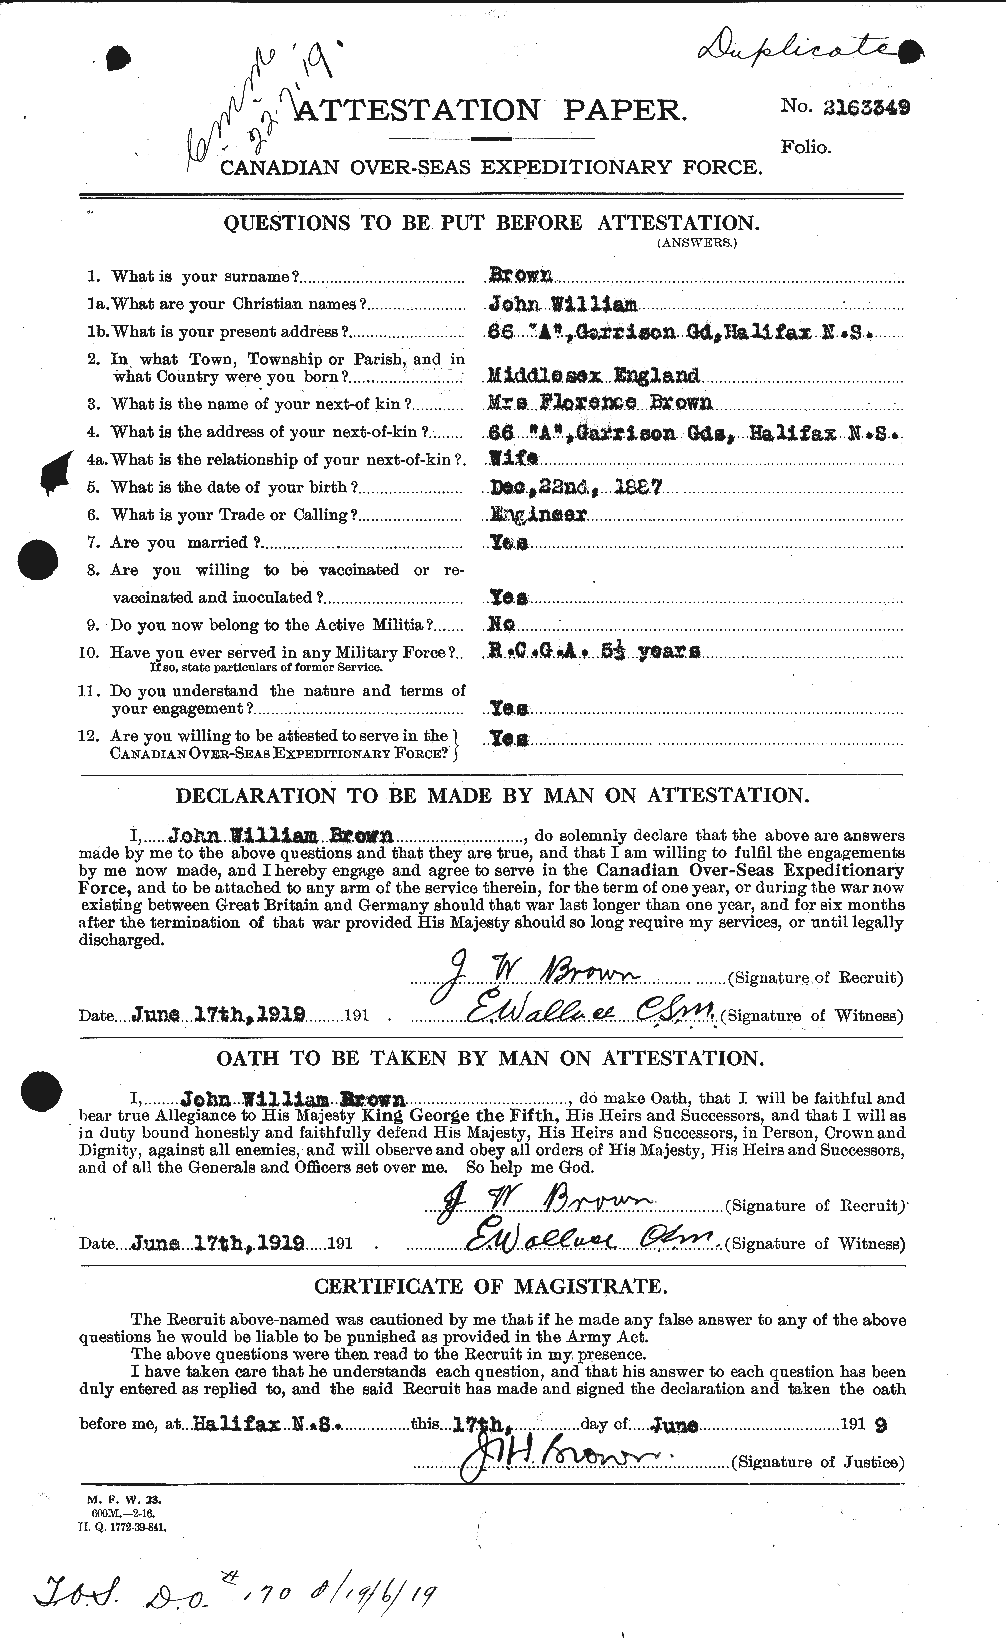 Personnel Records of the First World War - CEF 265906a